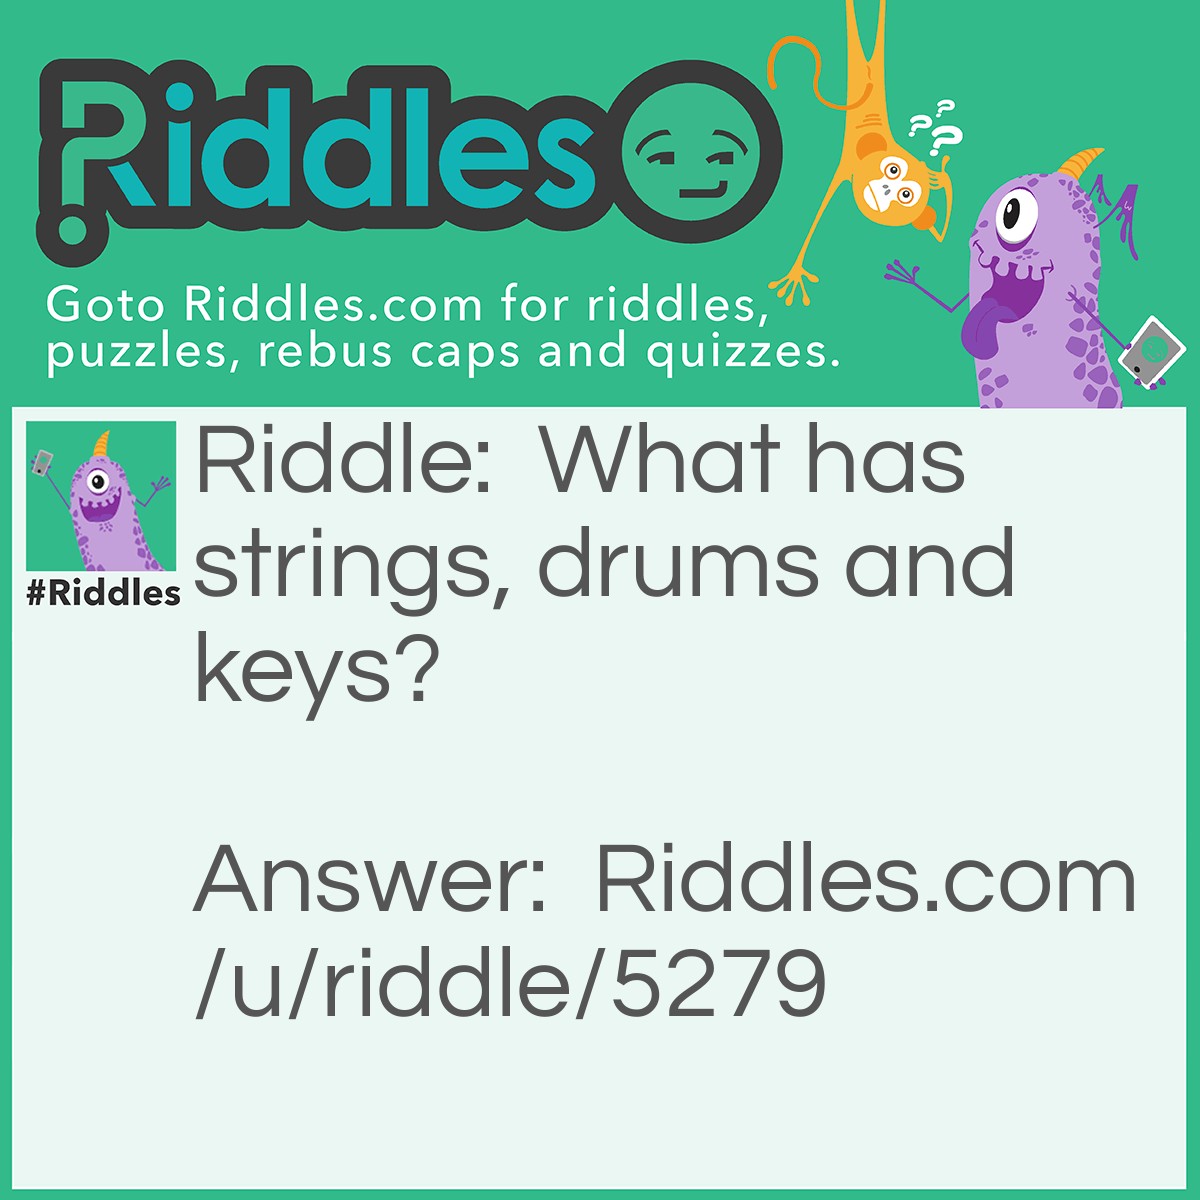 Riddle: What has strings, drums and keys? Answer: A piano!